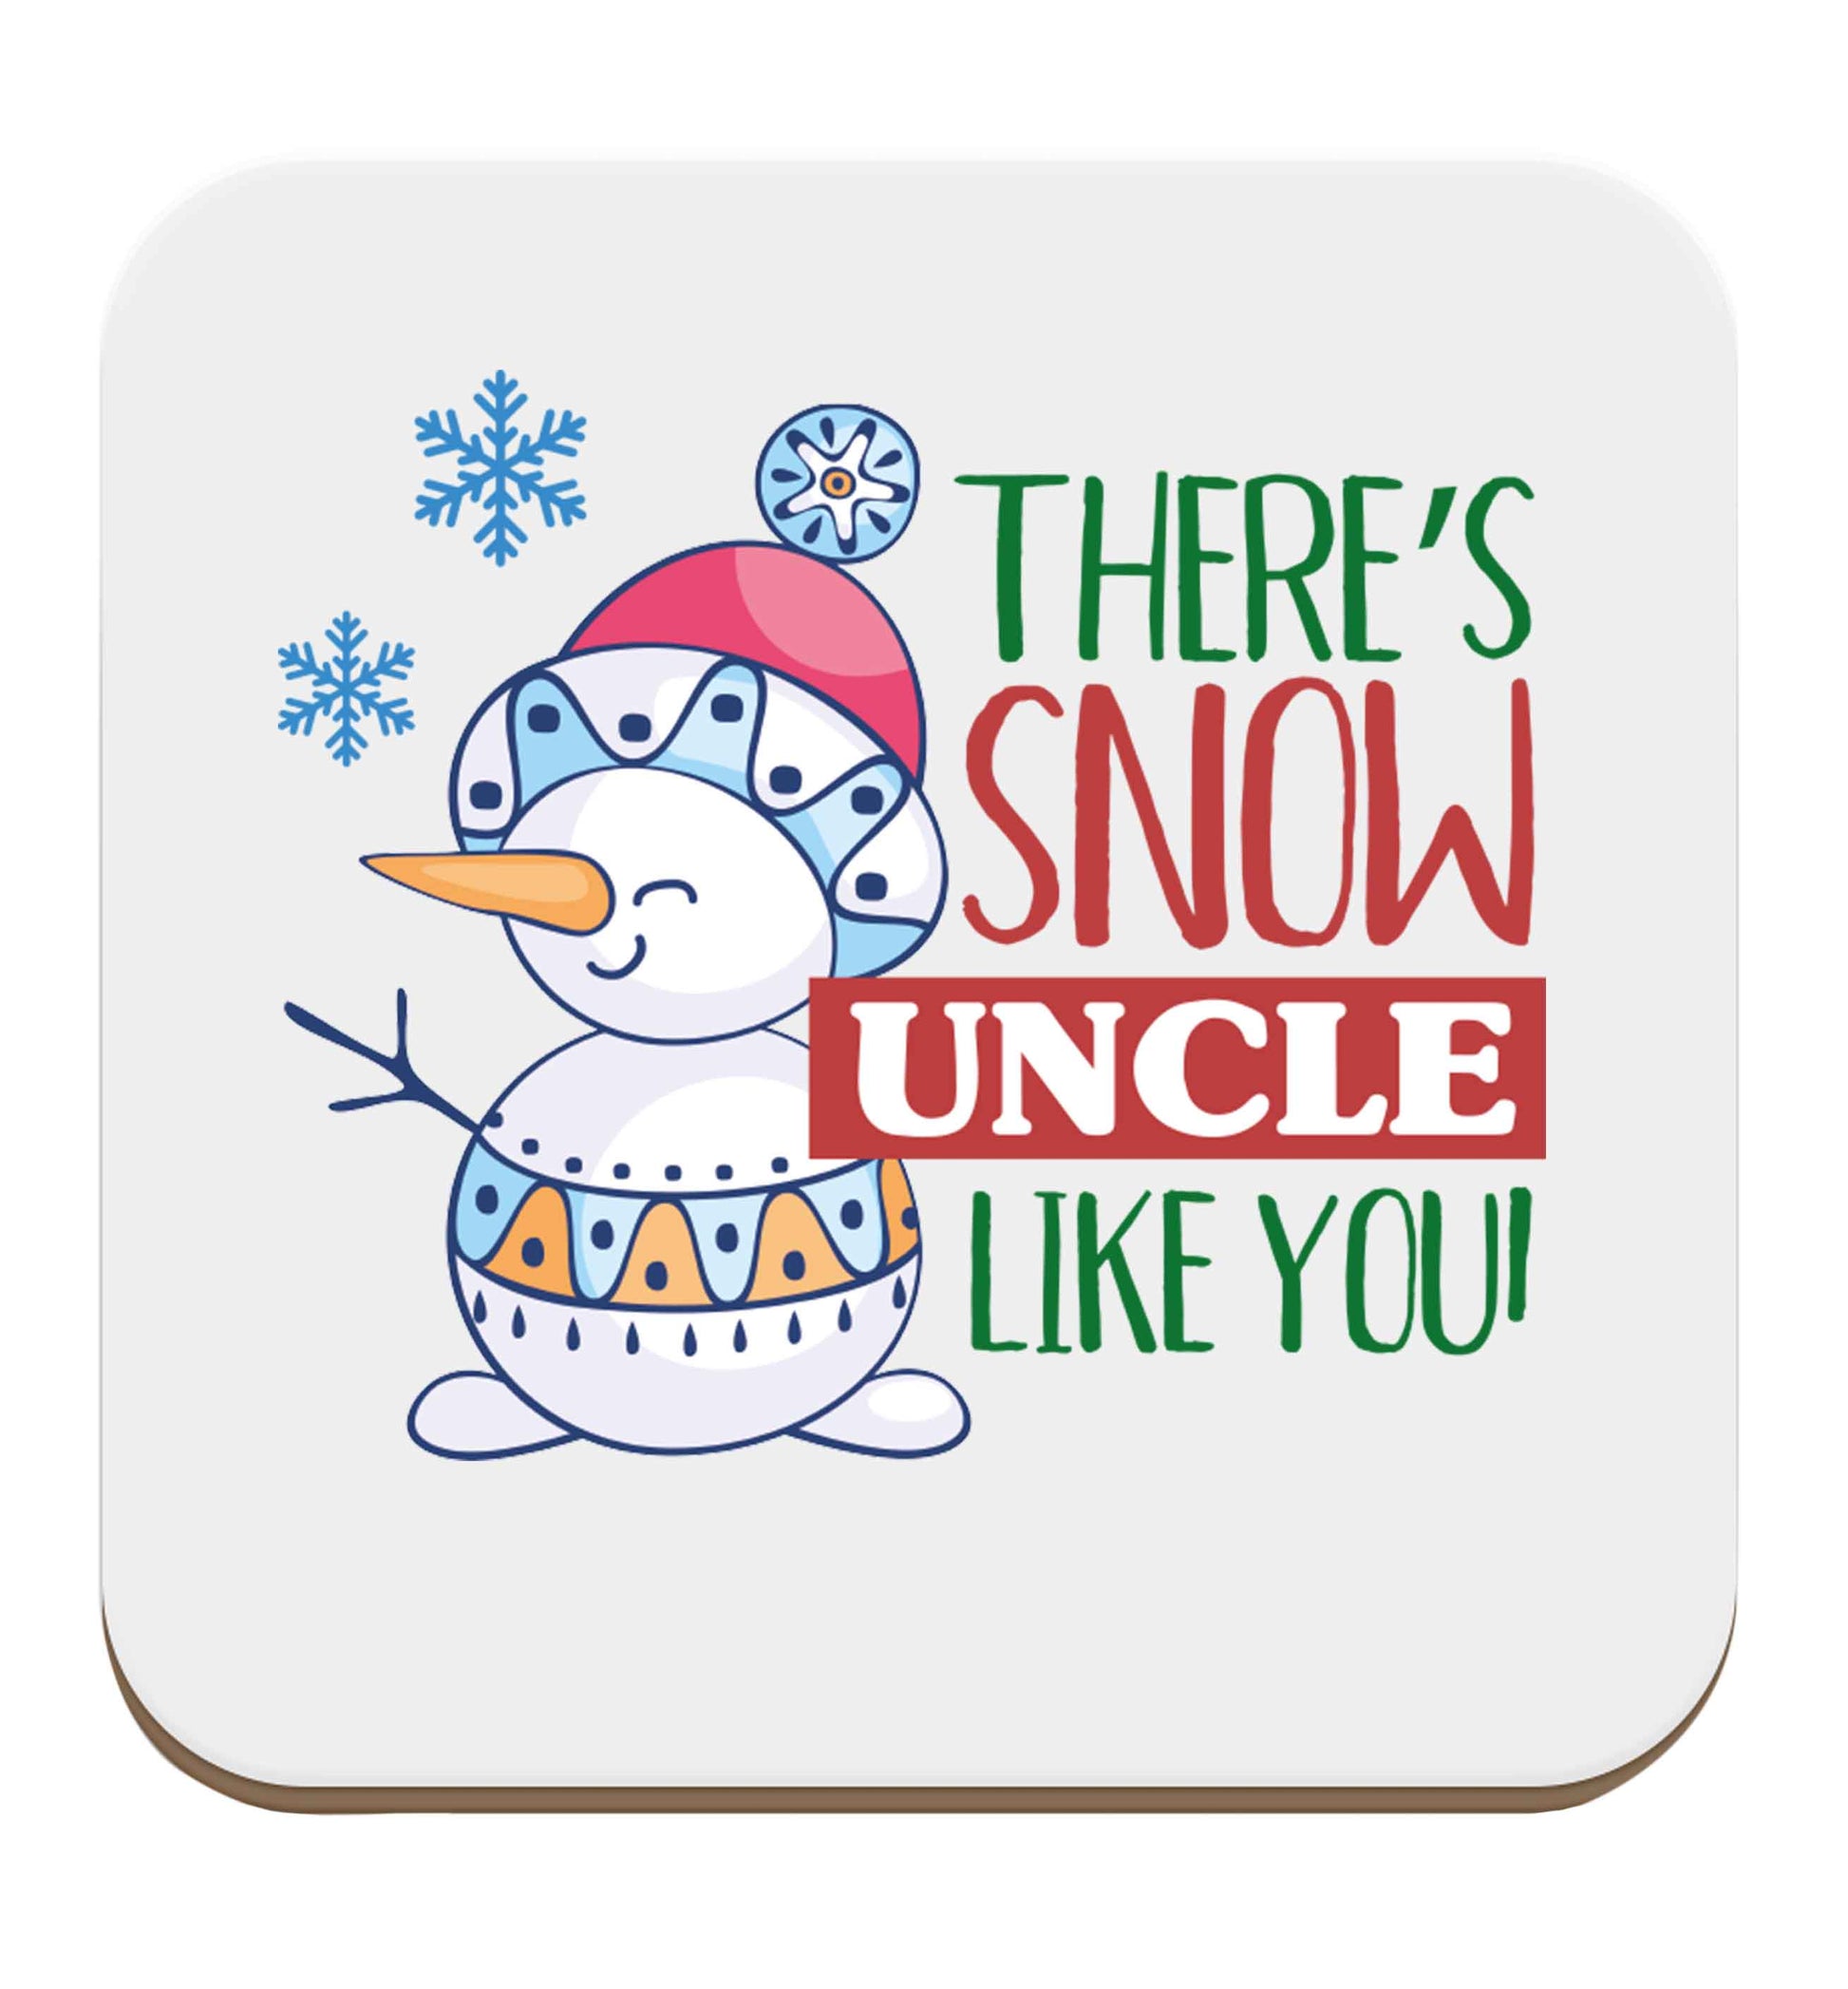 There's snow uncle like you set of four coasters